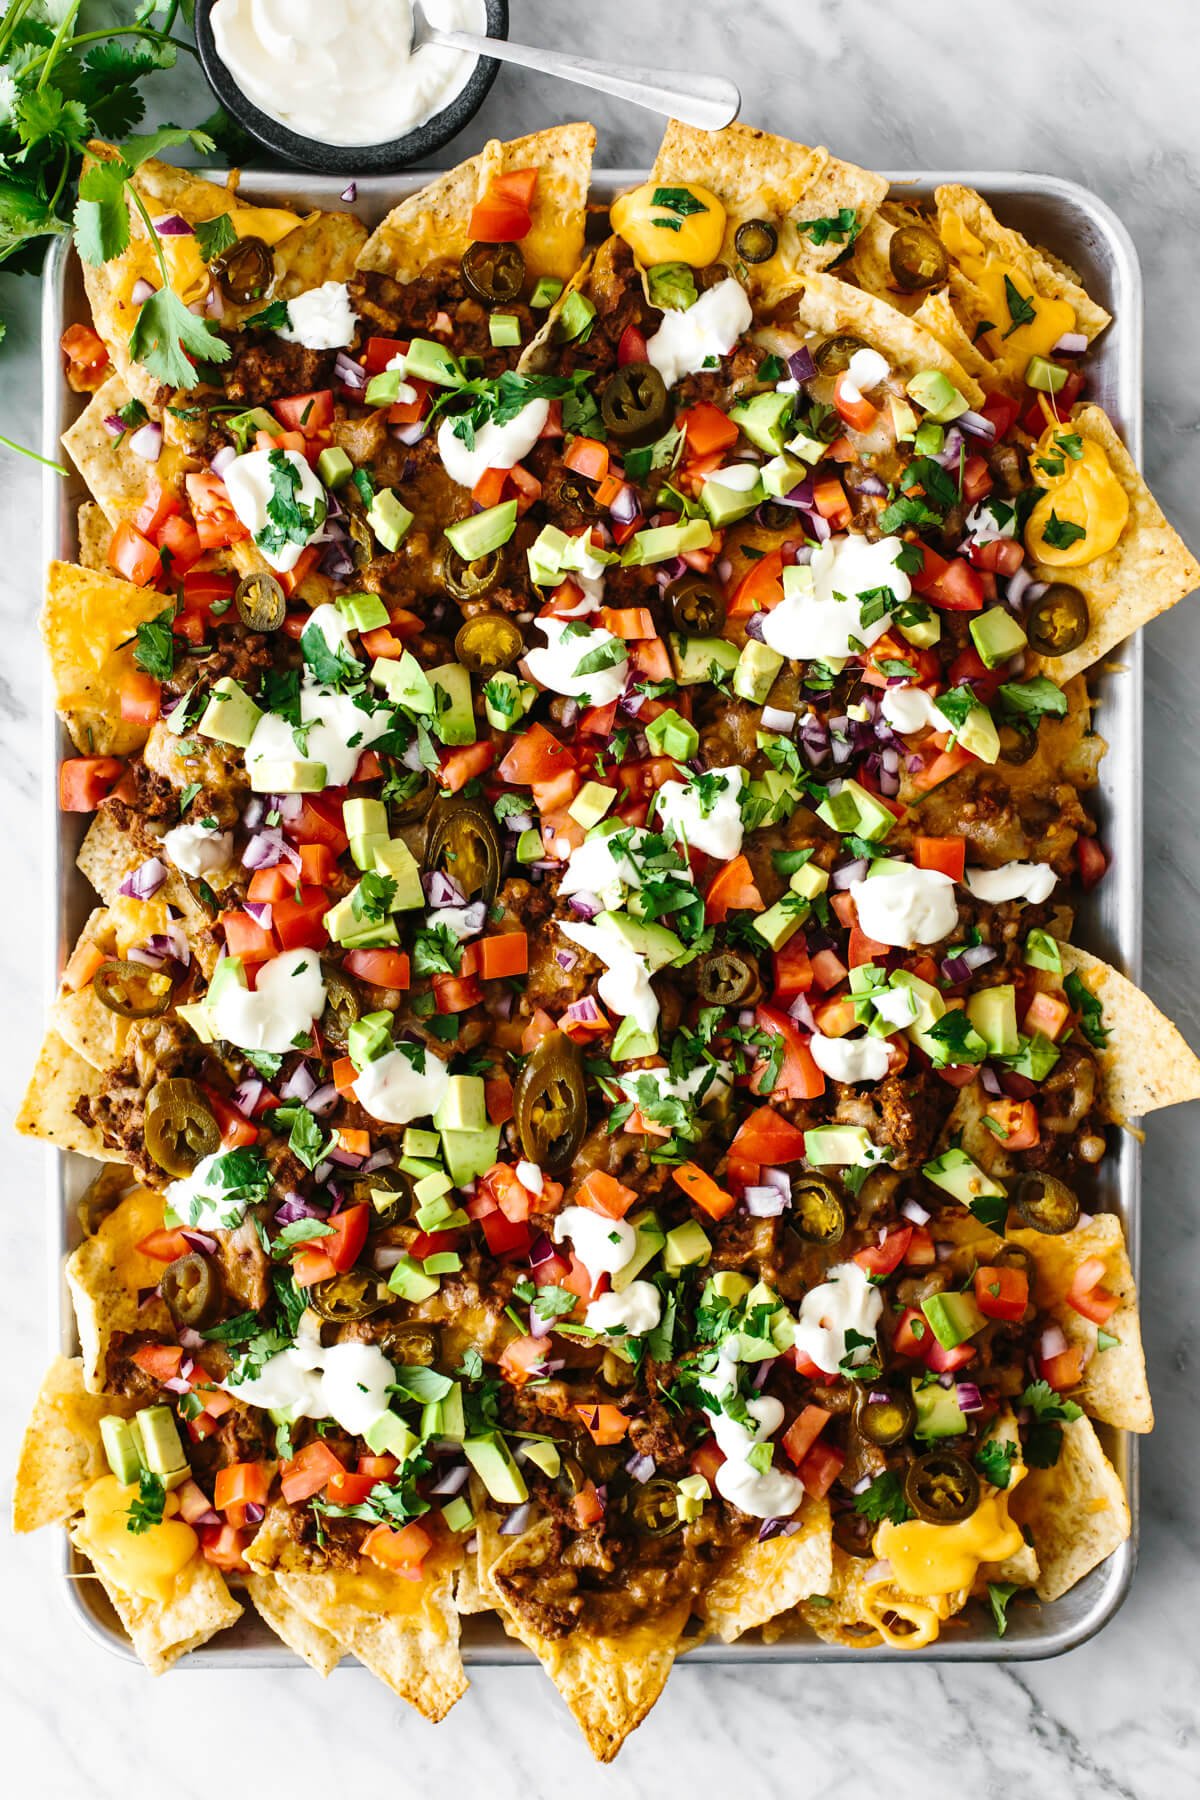 A tray filled with nachos and toppings.